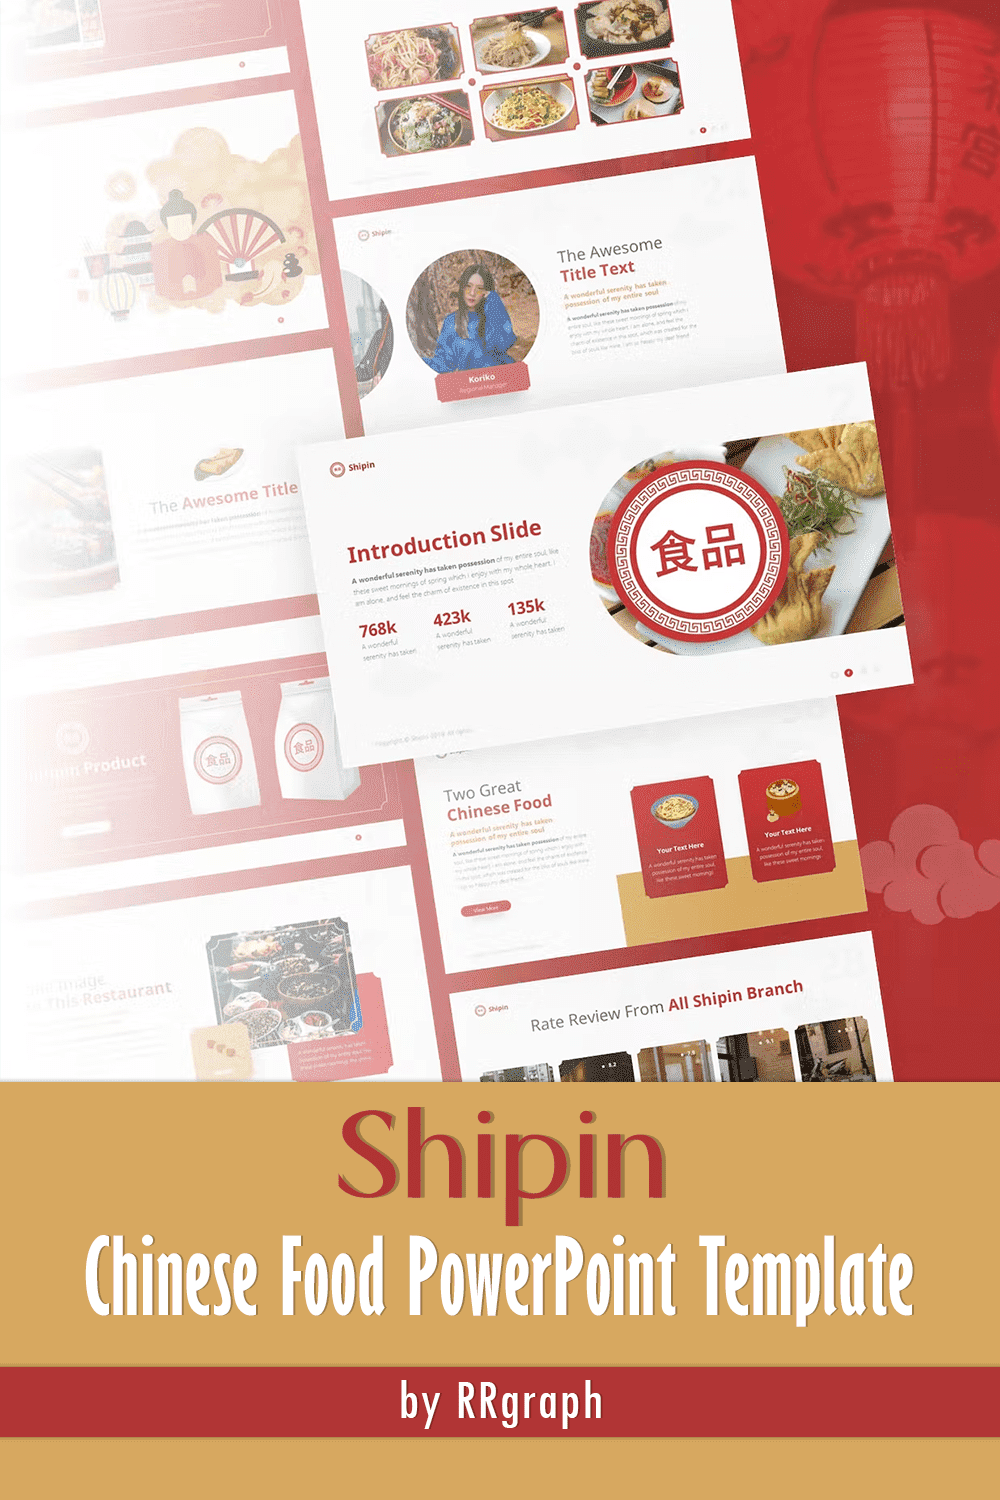 Shipin chinese food powerpoint template by RRgraph, picture for Pinterest.